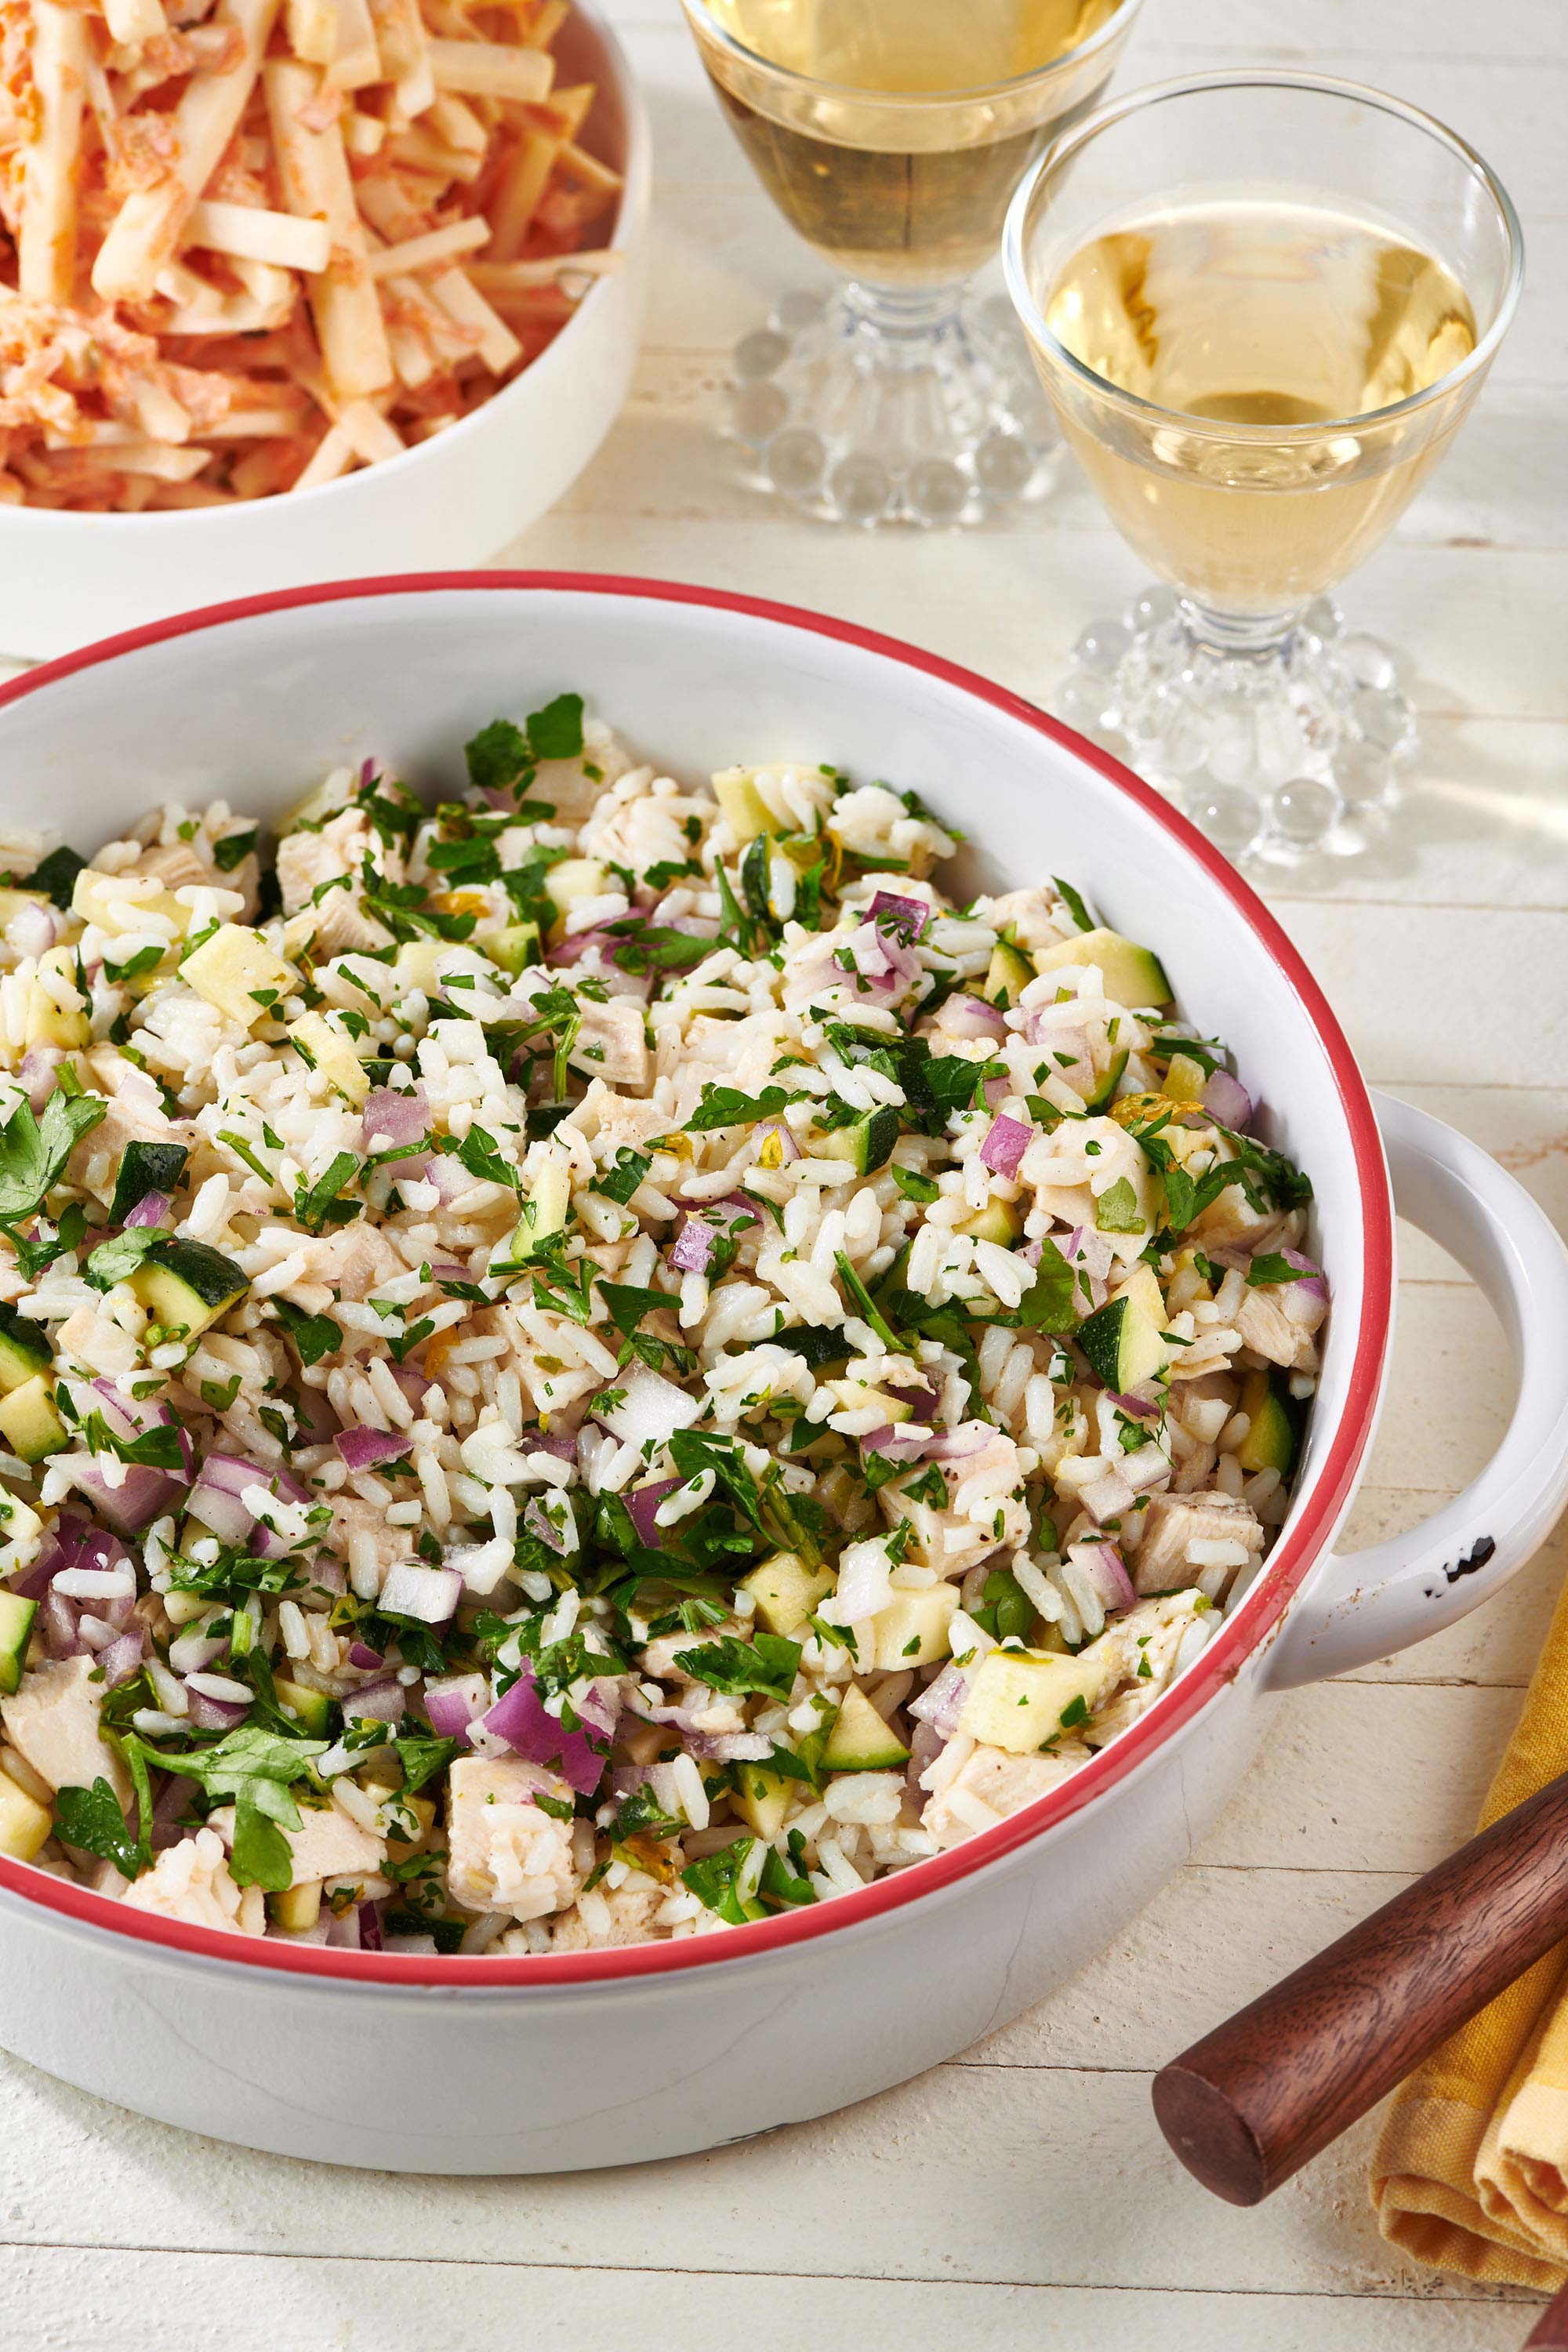 Chicken and Rice Salad in a serving bowl with two glasses of white wine and celeriac salad.